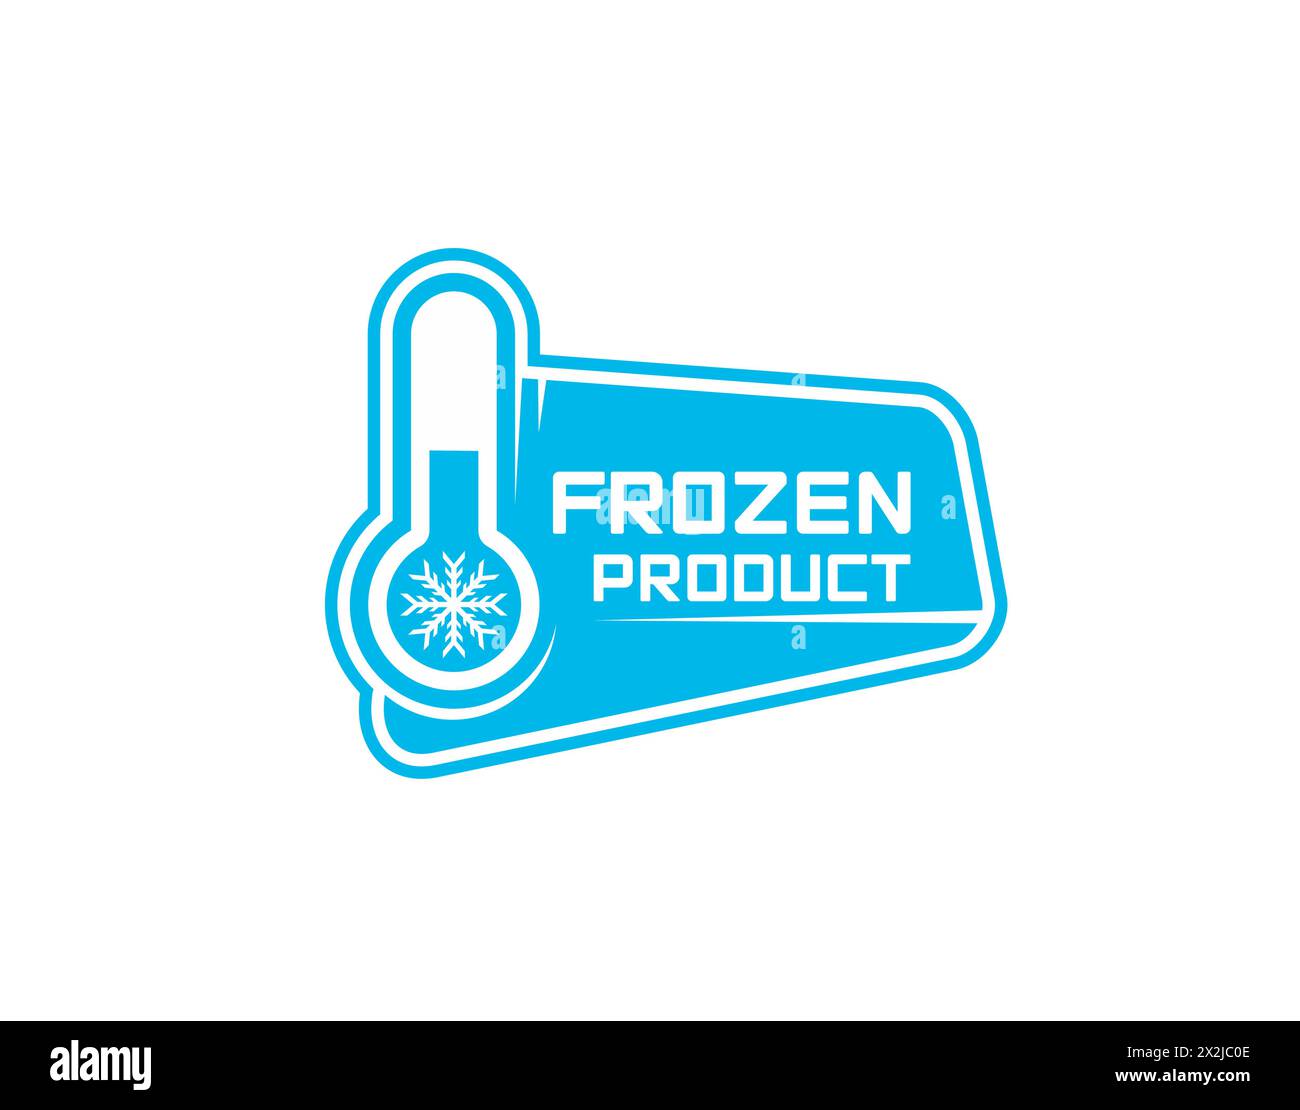 Frozen food icon of ice crystal label for product and keep cold vector badge. Frozen food stamp for fresh refrigerated meat, fish or seafood package with thermometer and snowflake icon Stock Vector